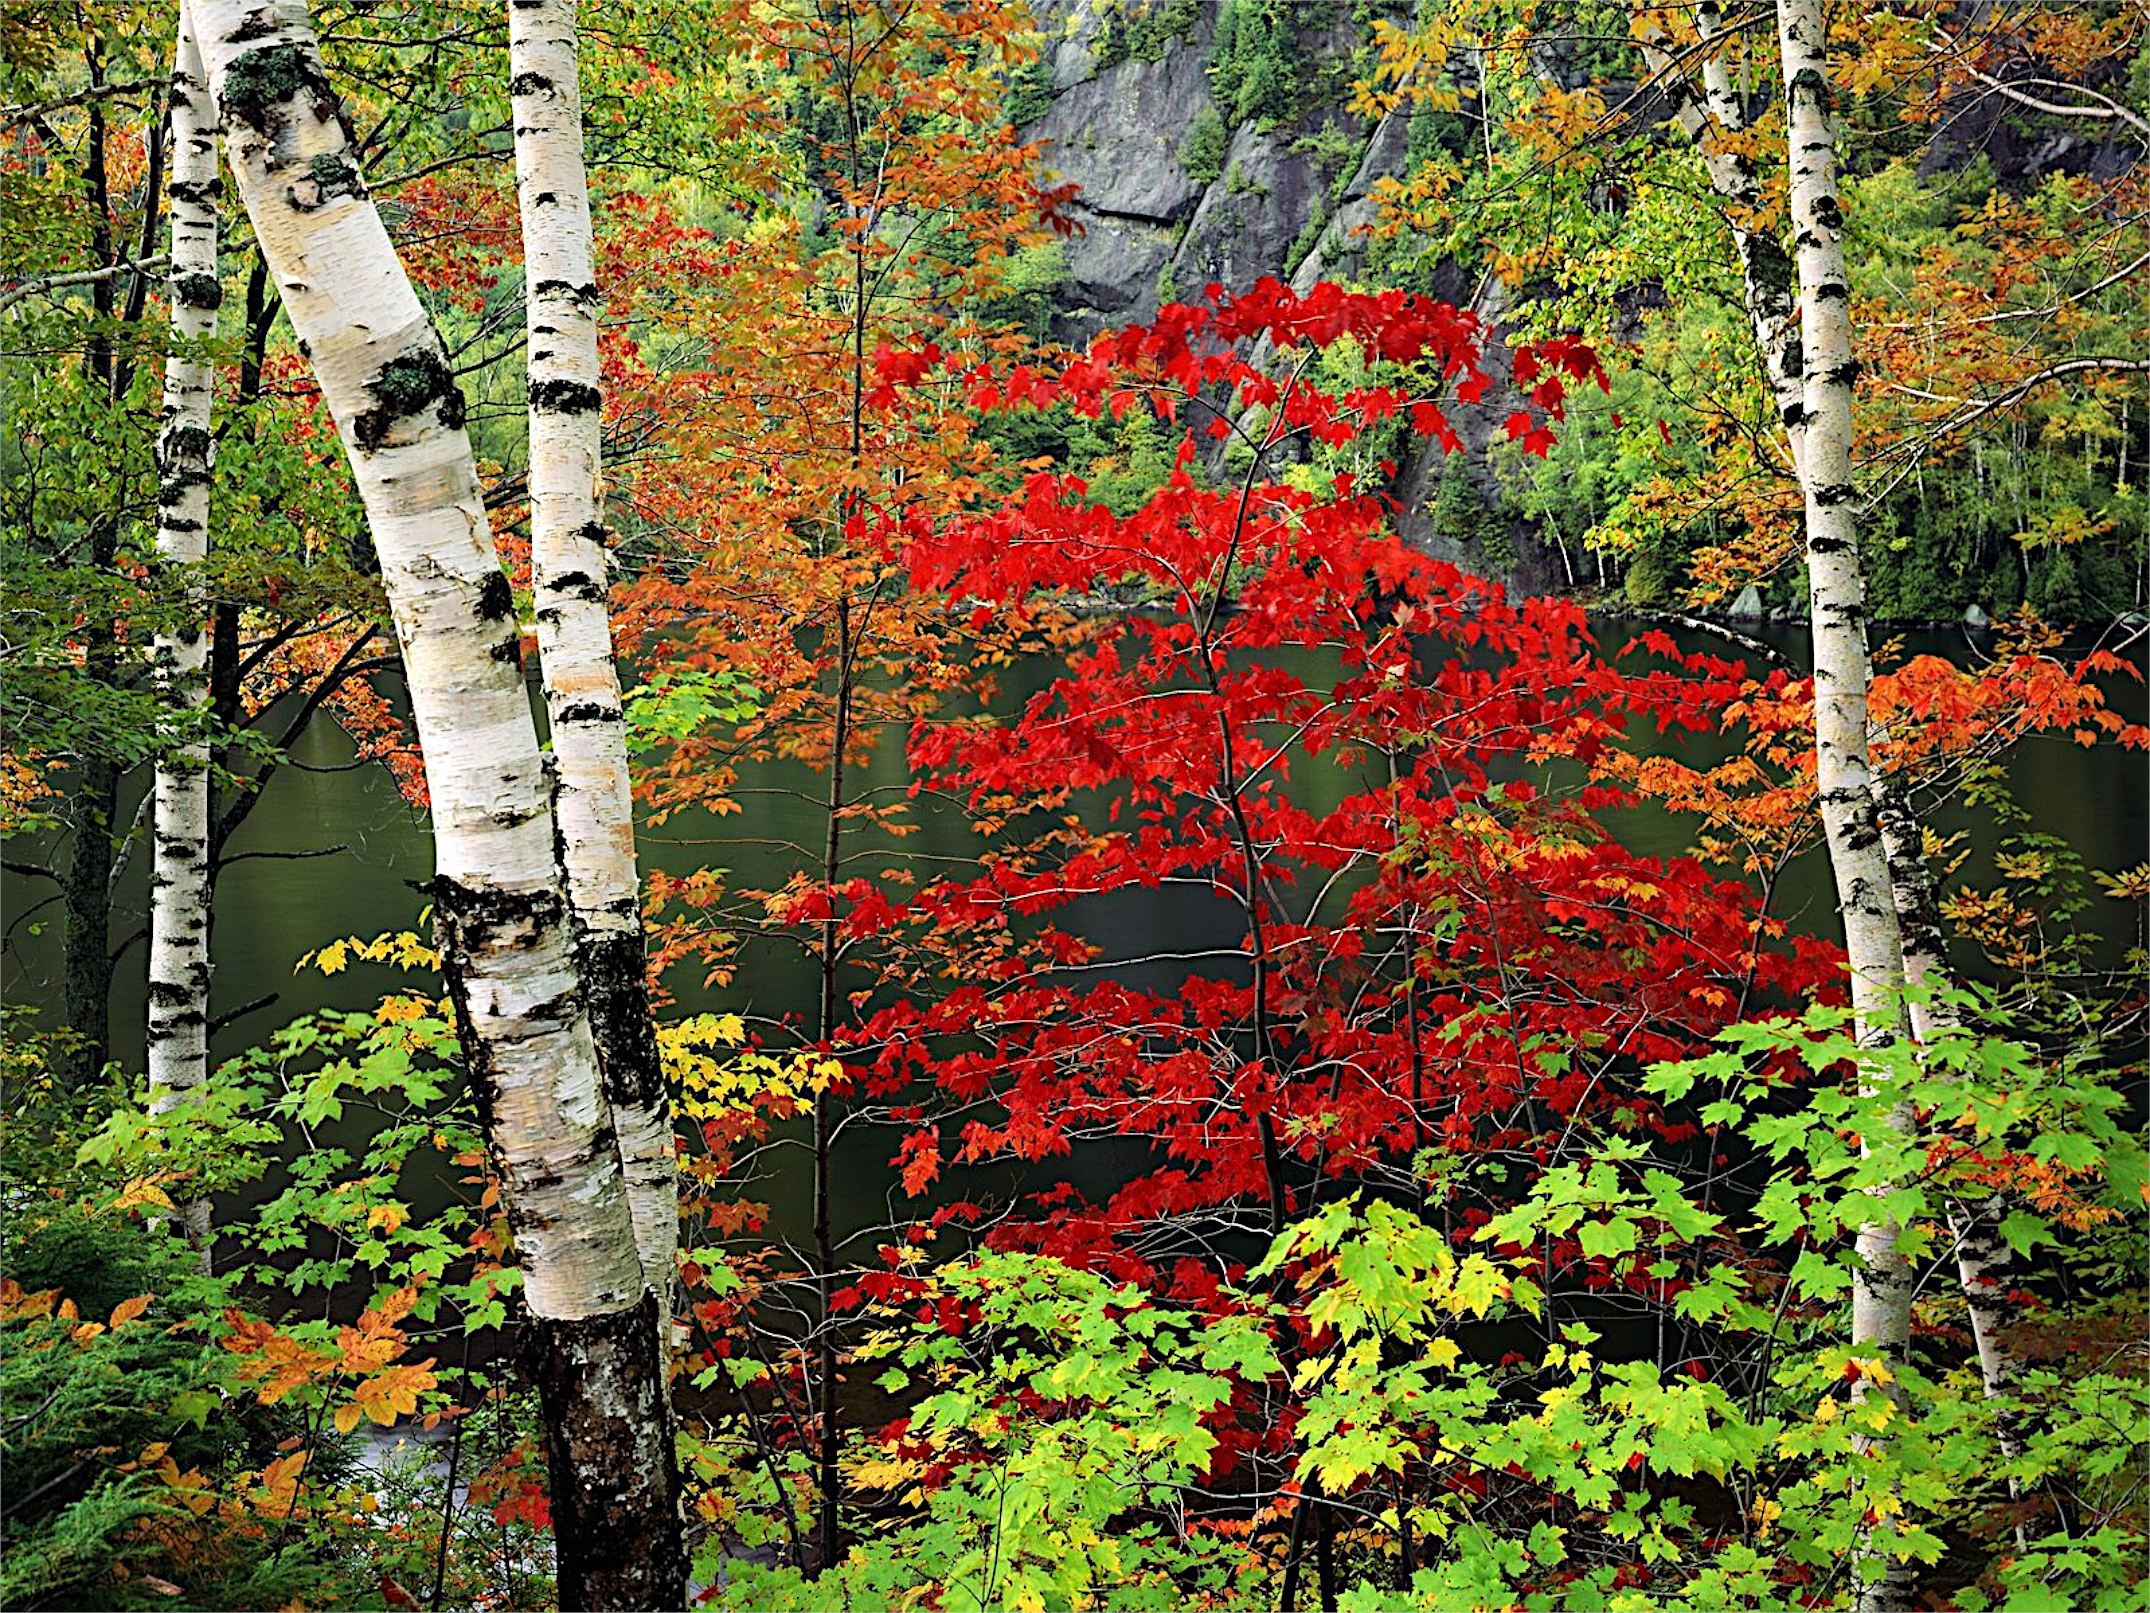 A tree with red leaves in an autumn forest